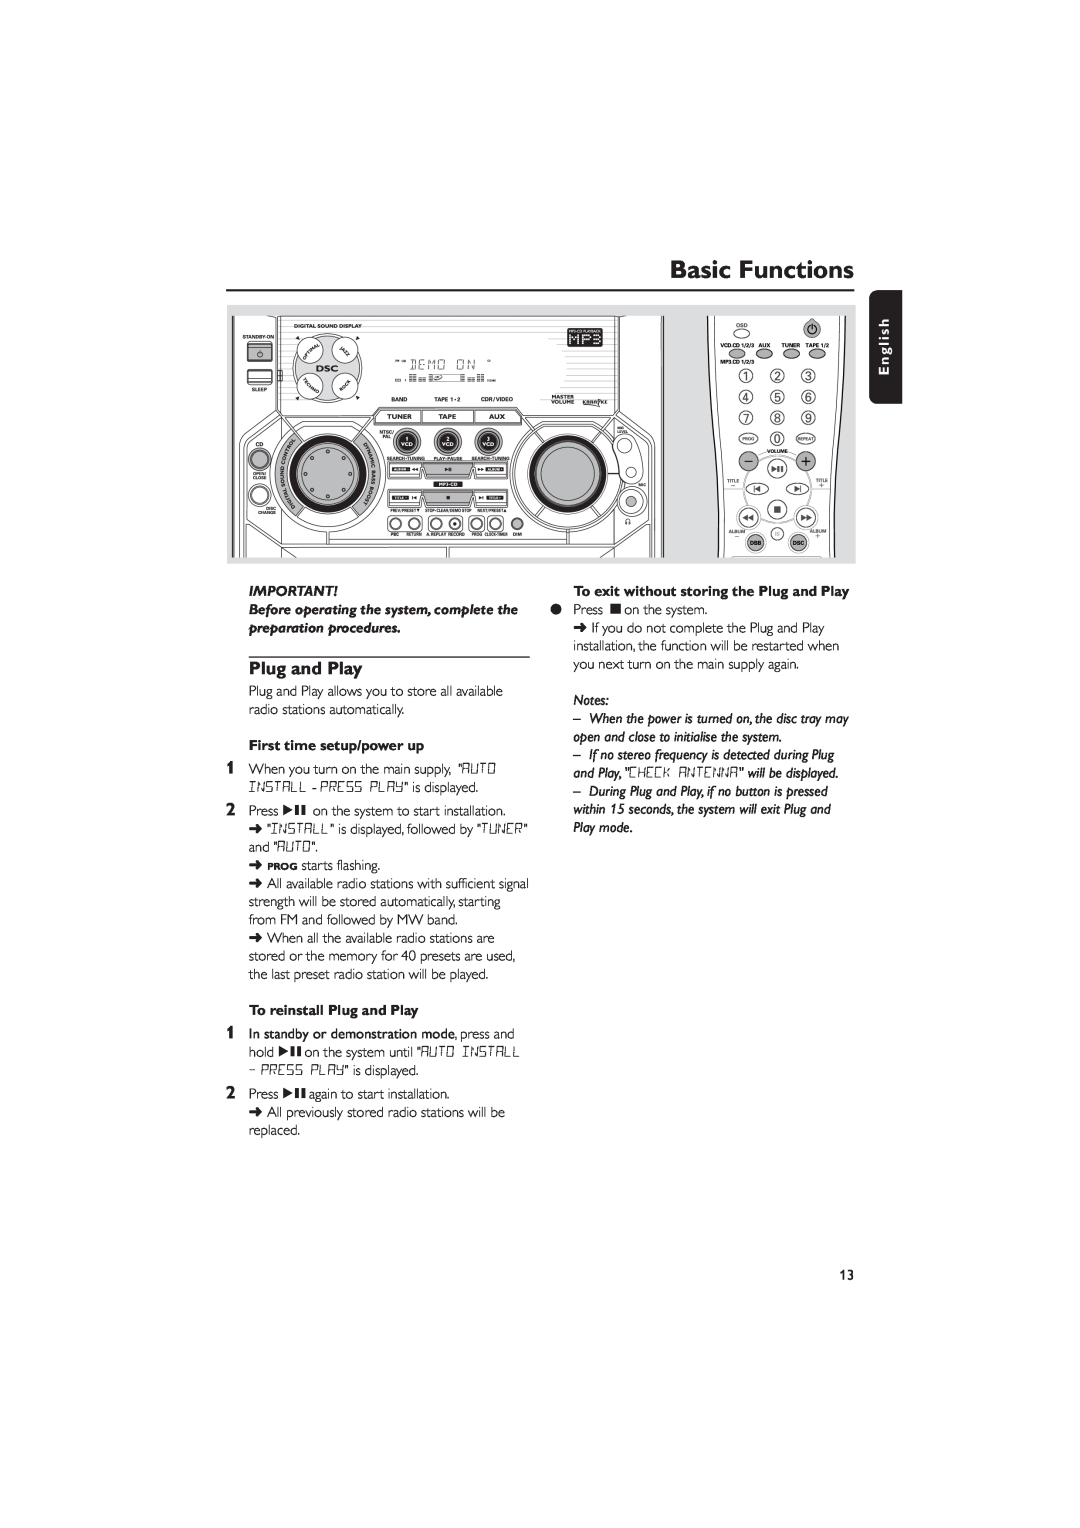 Philips FW-V330 manual Basic Functions, English, First time setup/power up, To exit without storing the Plug and Play 